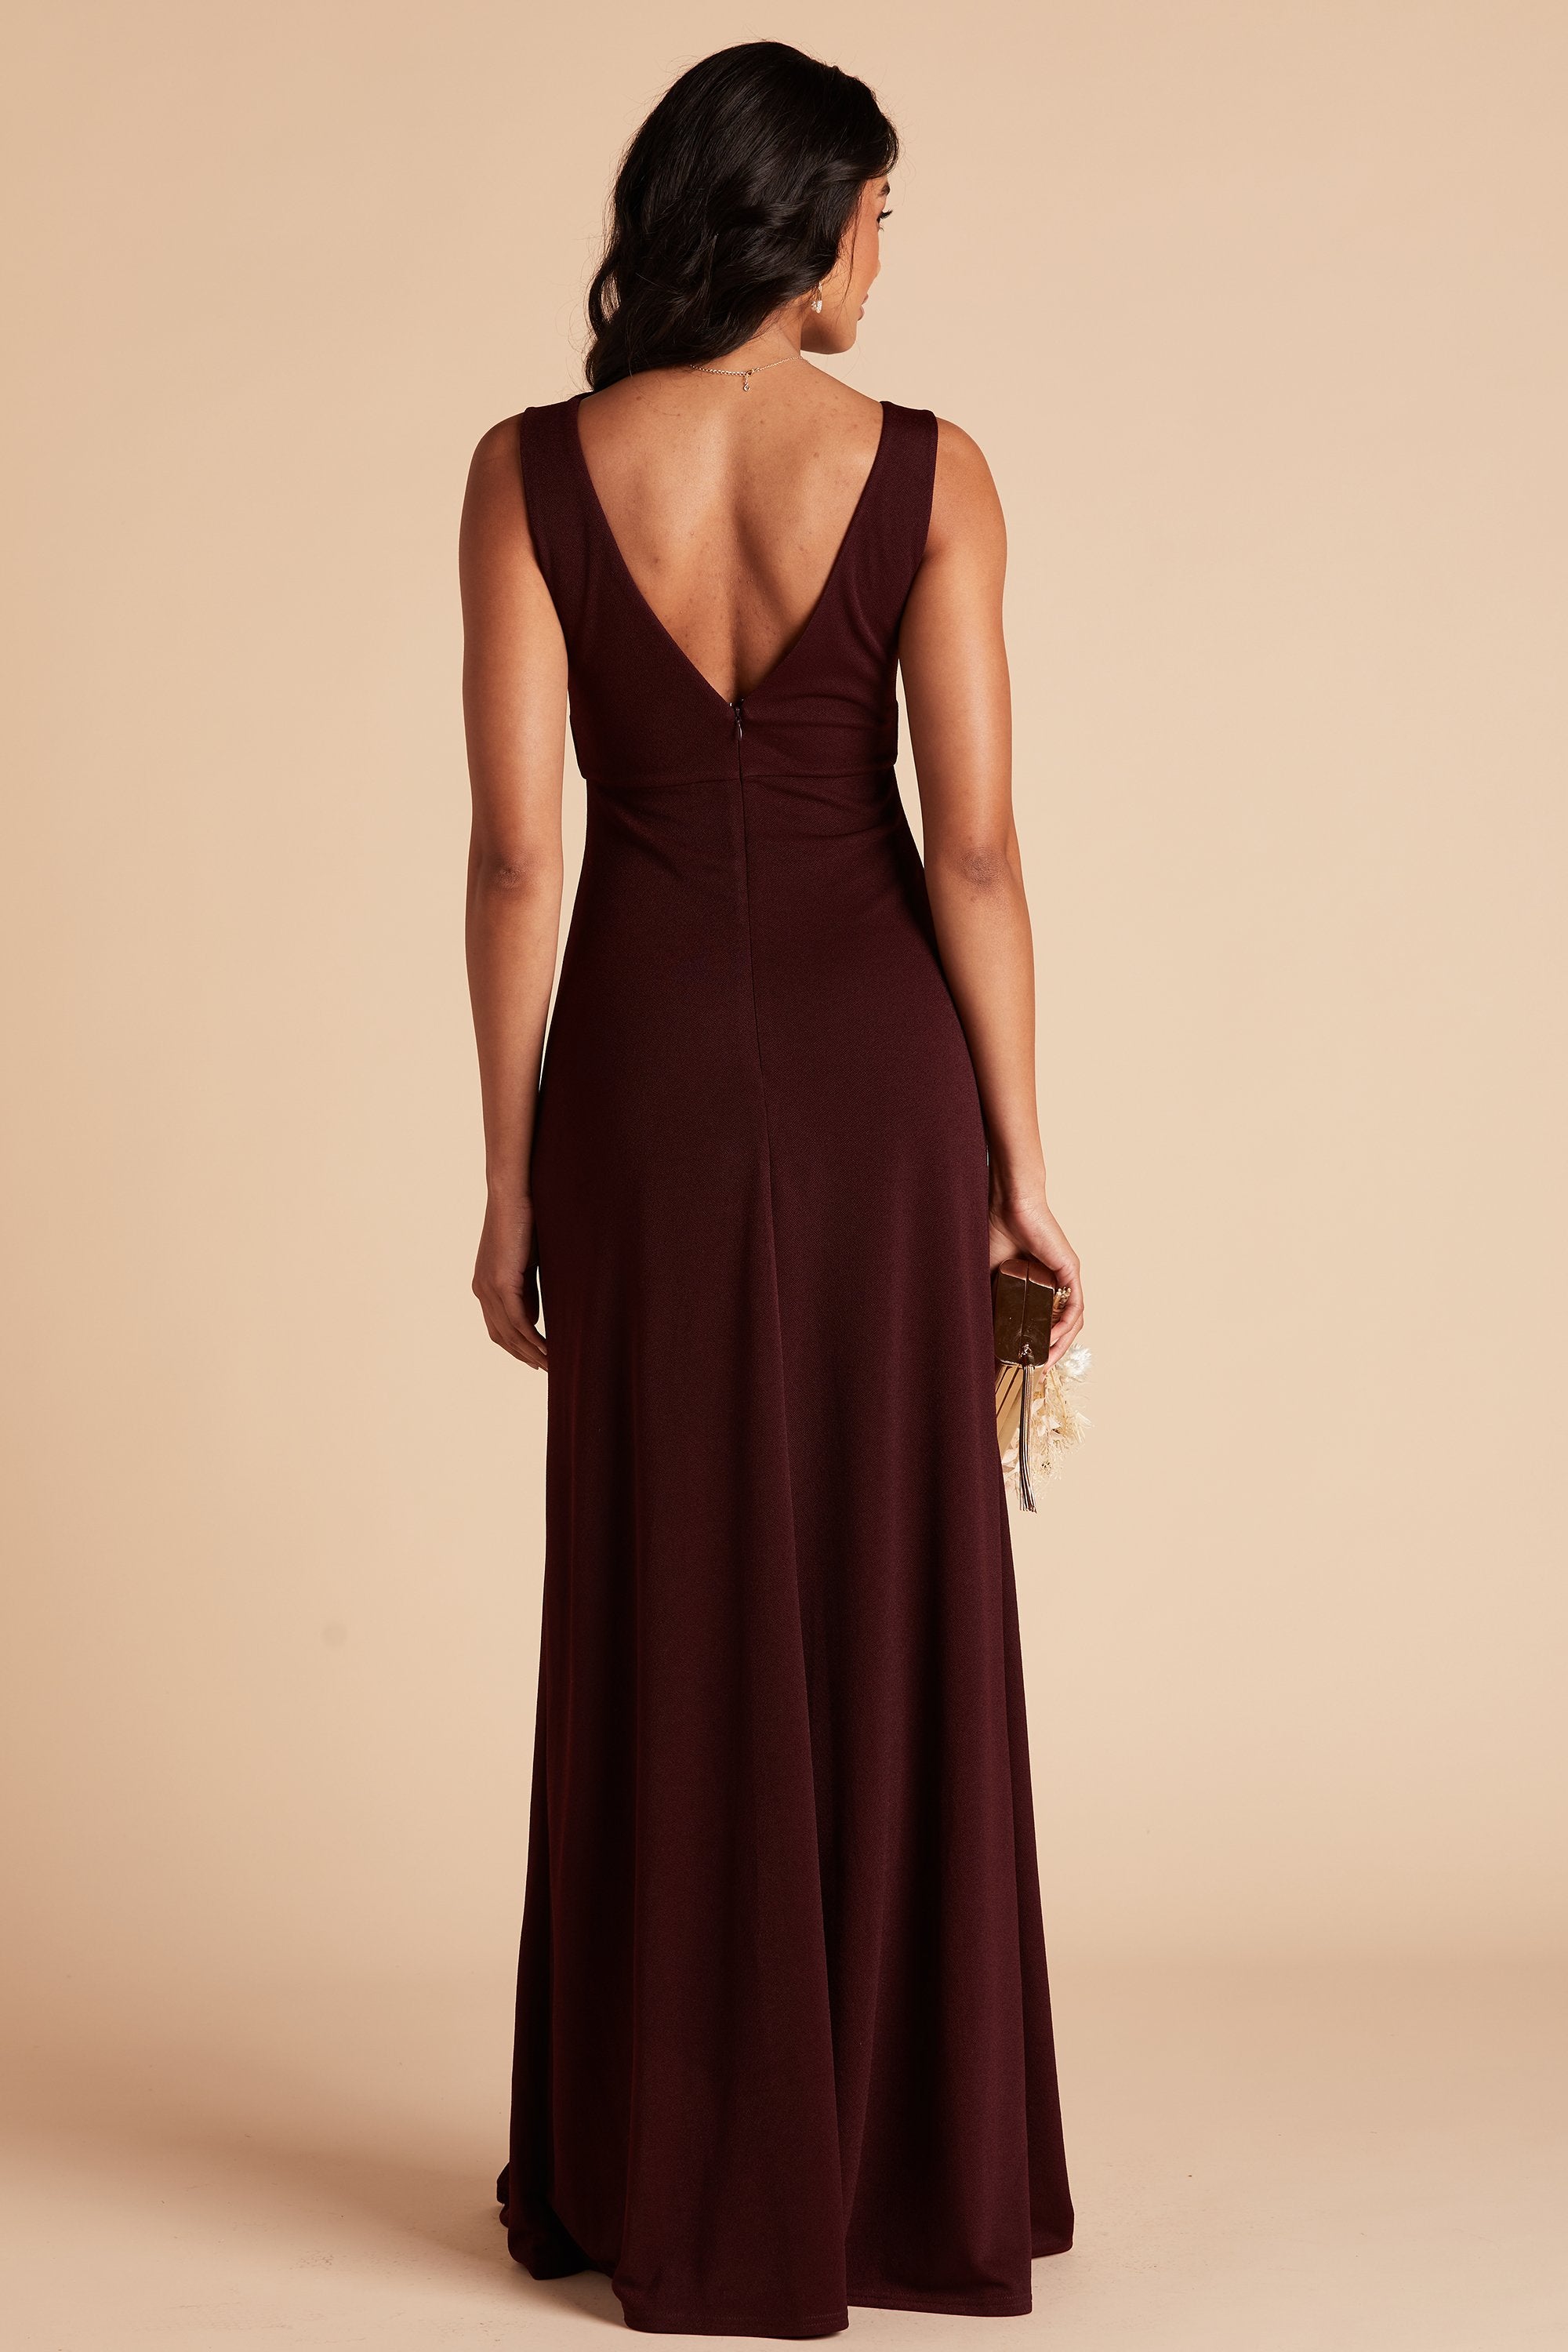 Shamin bridesmaid dress in cabernet burgundy crepe by Birdy Grey, back view